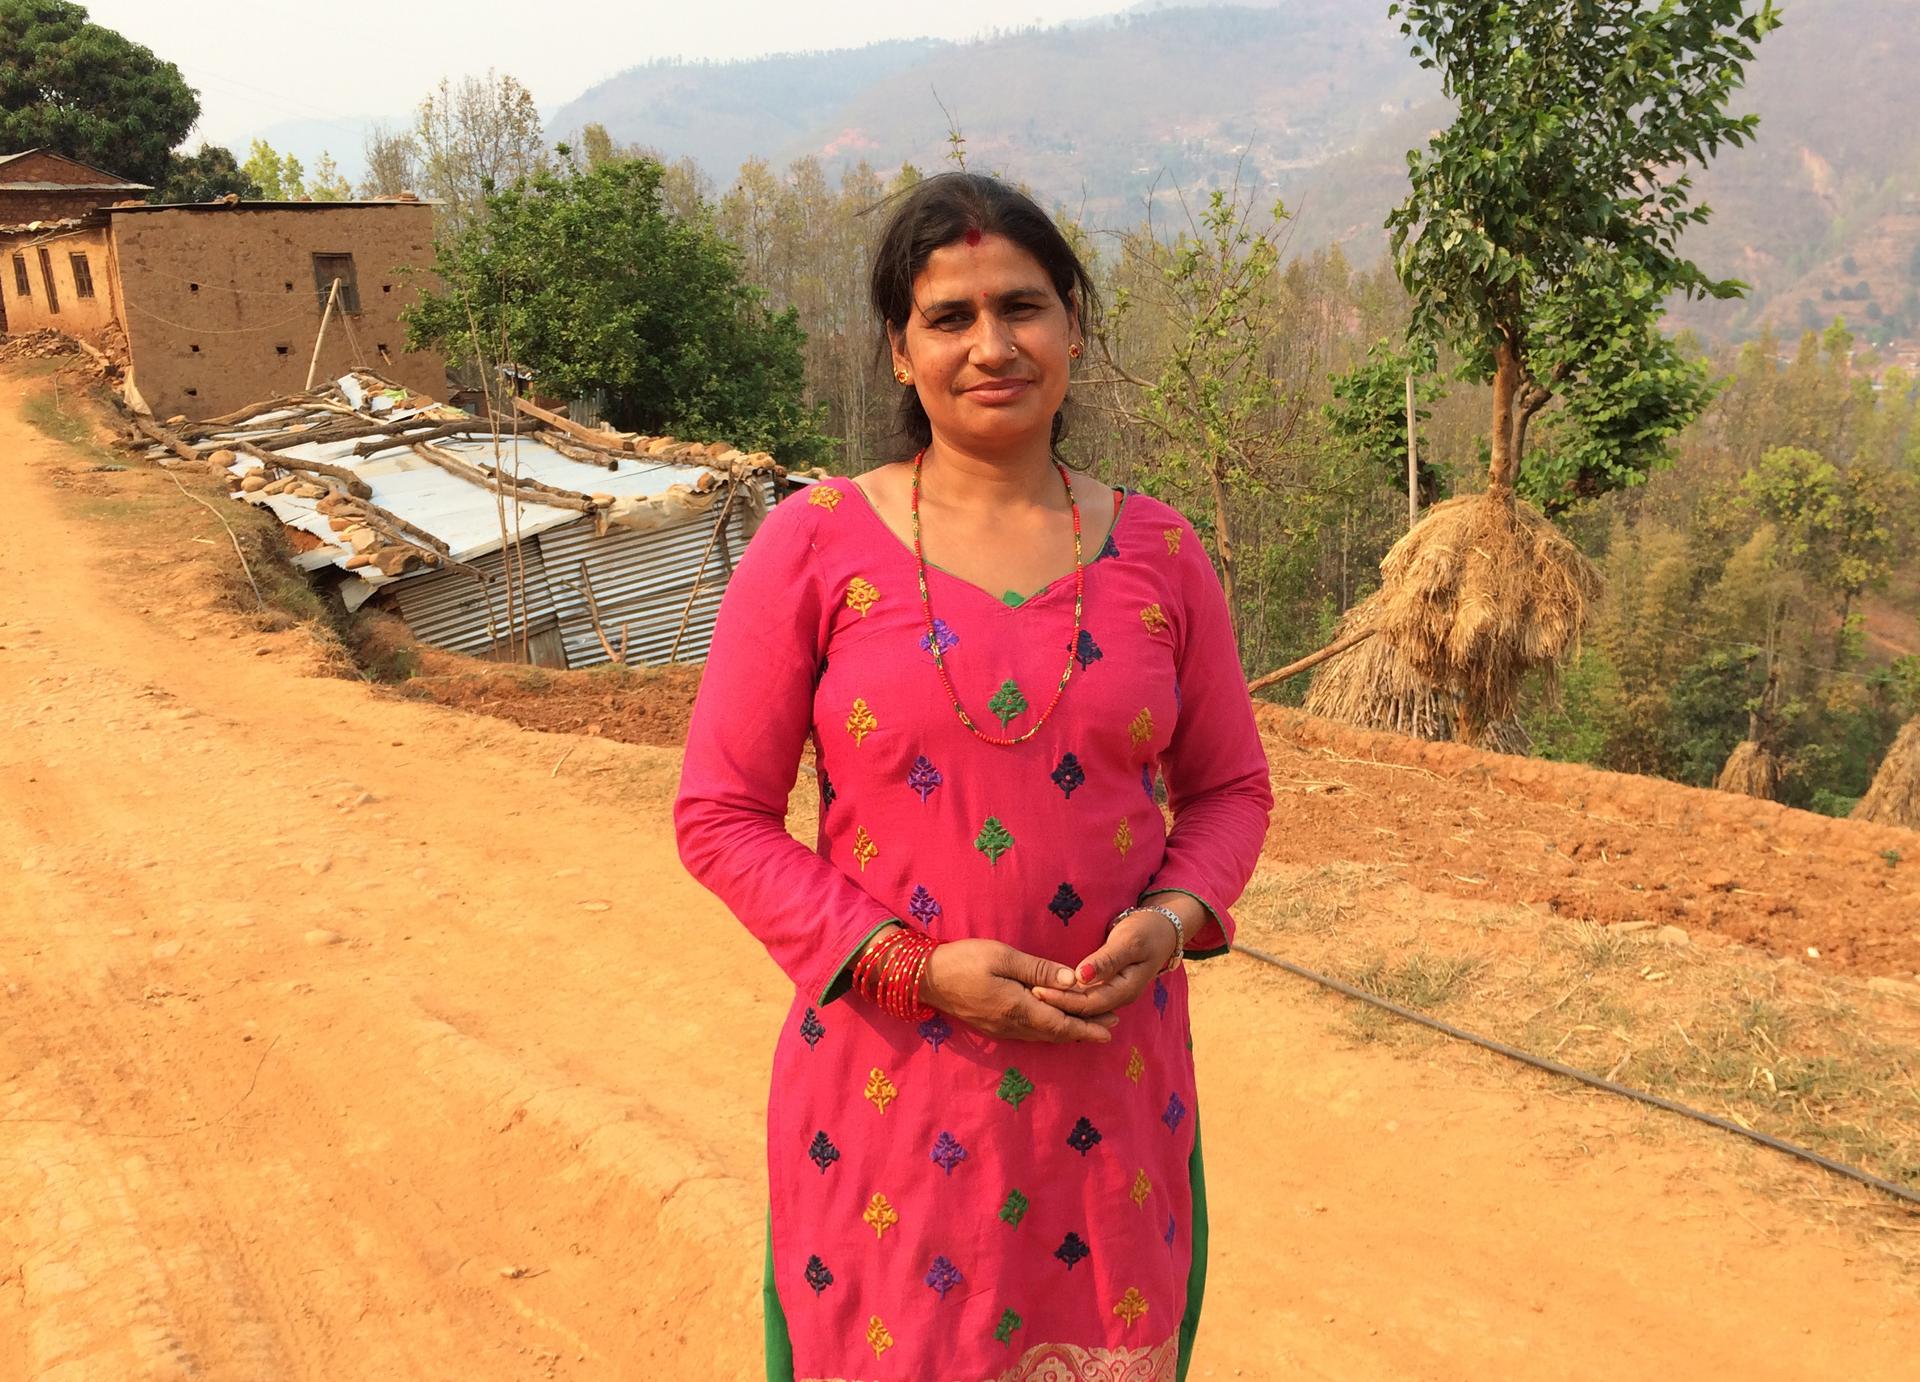 Bimala Parajuli is a volunteer community health worker in a remote mountain village in Nepal. Her home was destroyed in last year's earthquake.